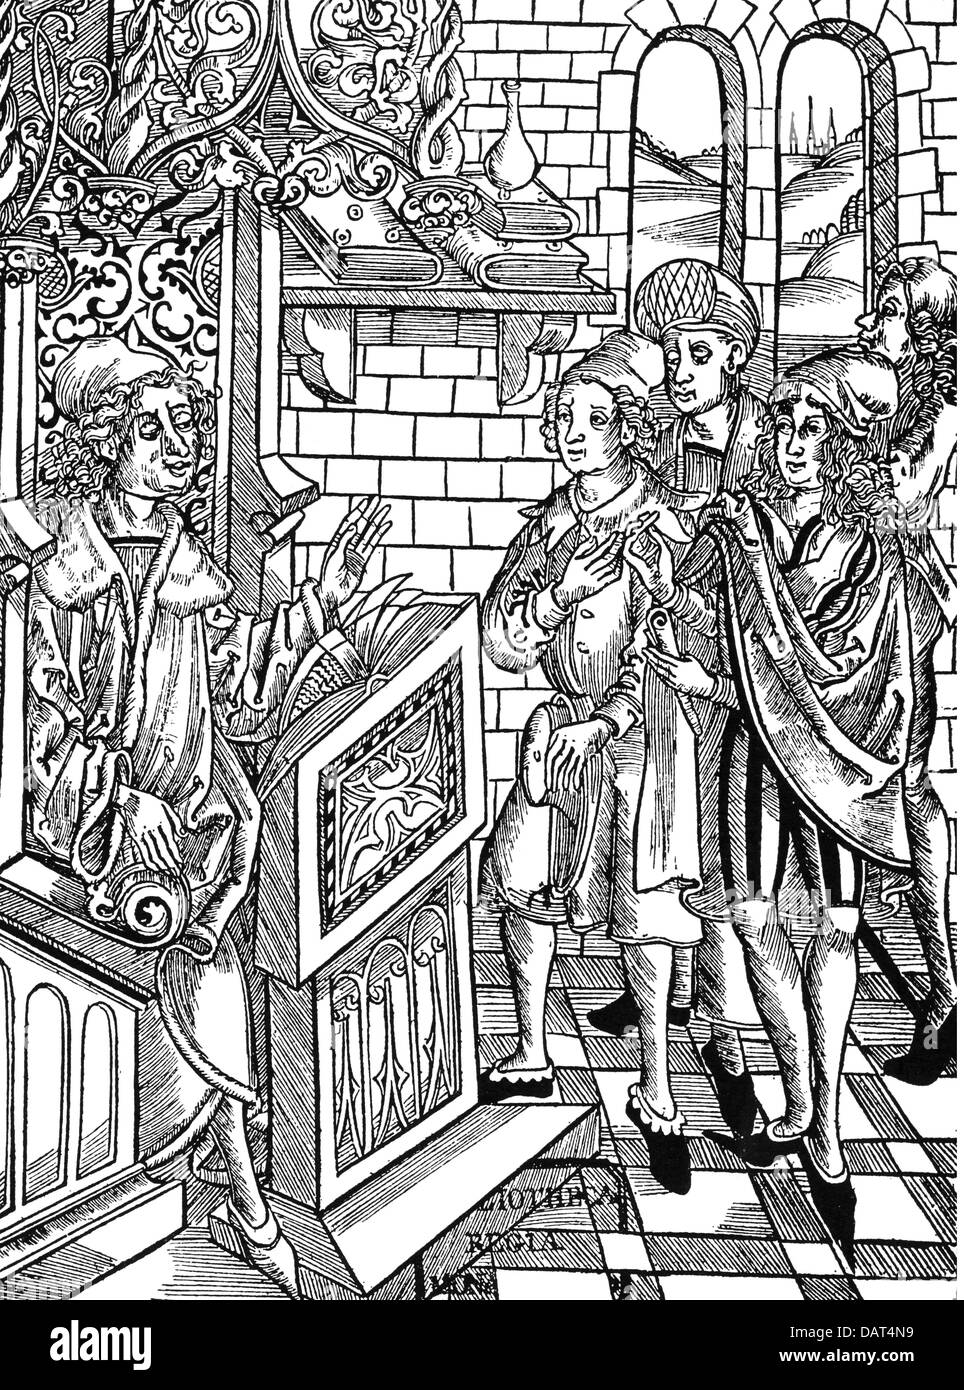 pedagogy, university, professor and students, woodcut, out of: Hieronymus Brunschwig (circa 1450 - circa 1512), 'Das Buch der Cirurgia', print: Johann Grüninger, Strasbourg, 1497, Additional-Rights-Clearences-Not Available Stock Photo